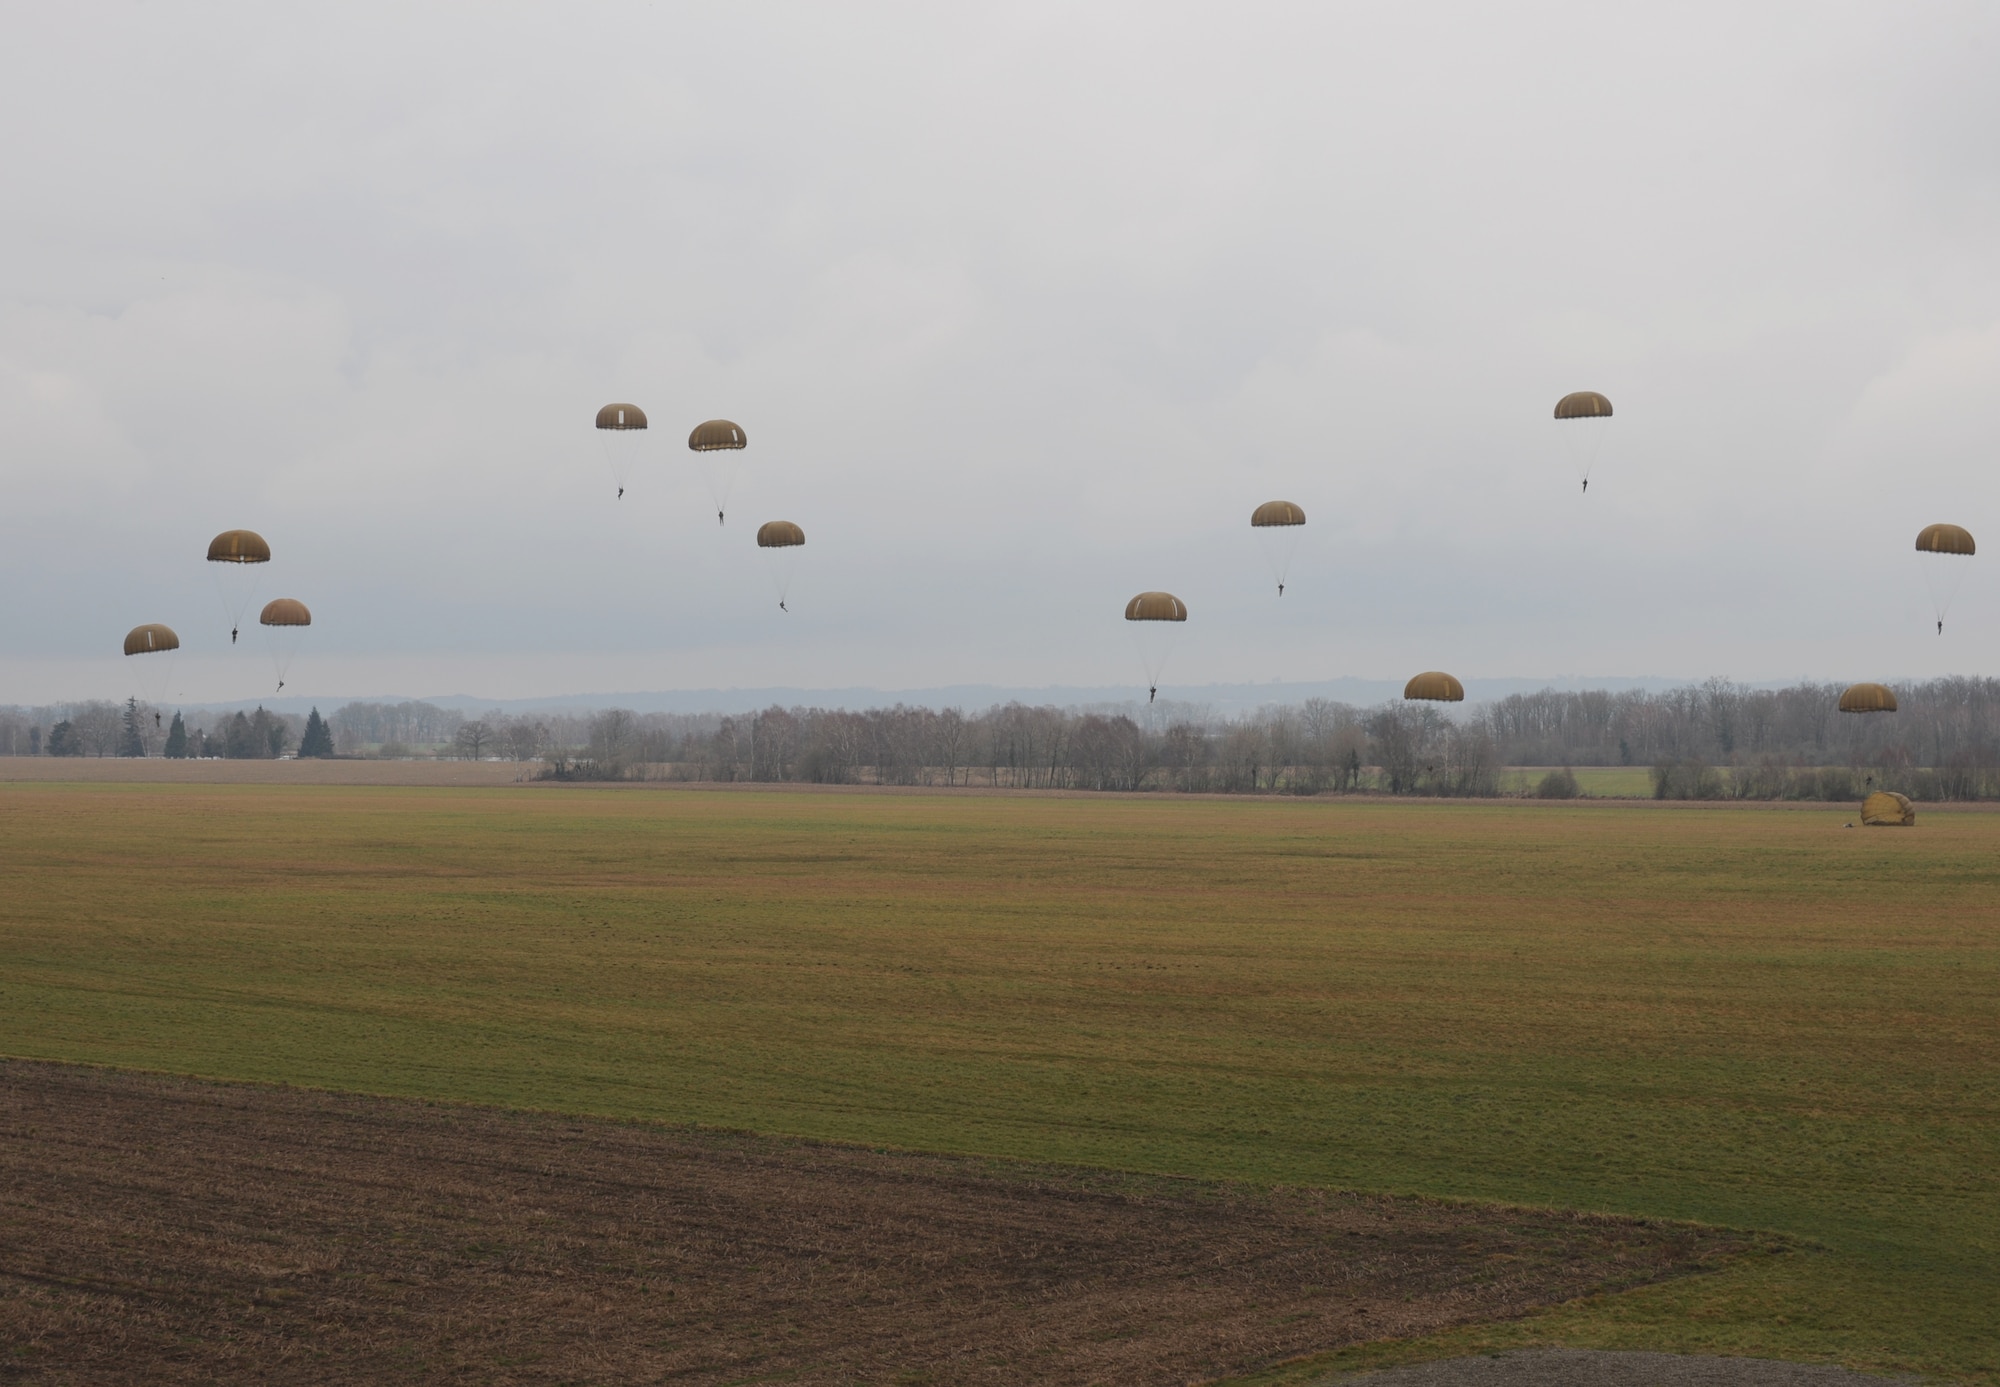 Airborne members fill the skies with their chutes after during a jump at École des troupes aéroportées (ETAP) Pau, France, March 4, 2010. Members of the 435th Contingency Response Group and the 5th Quartermaster Company joined with their French military counterparts for a week of training at the École des troupes aéroportées (ETAP), or School of Airborne Troops, a military school dedicated to training the military paratroopers  the French army, located in the town of Pau, in the département of Pyrénées-Atlantiques, France.  The ETAP is responsible for training paratroopers, and for international cooperation and promotion of paratroop culture. (U.S. Air Force photo by Airman 1st Class Caleb Pierce)